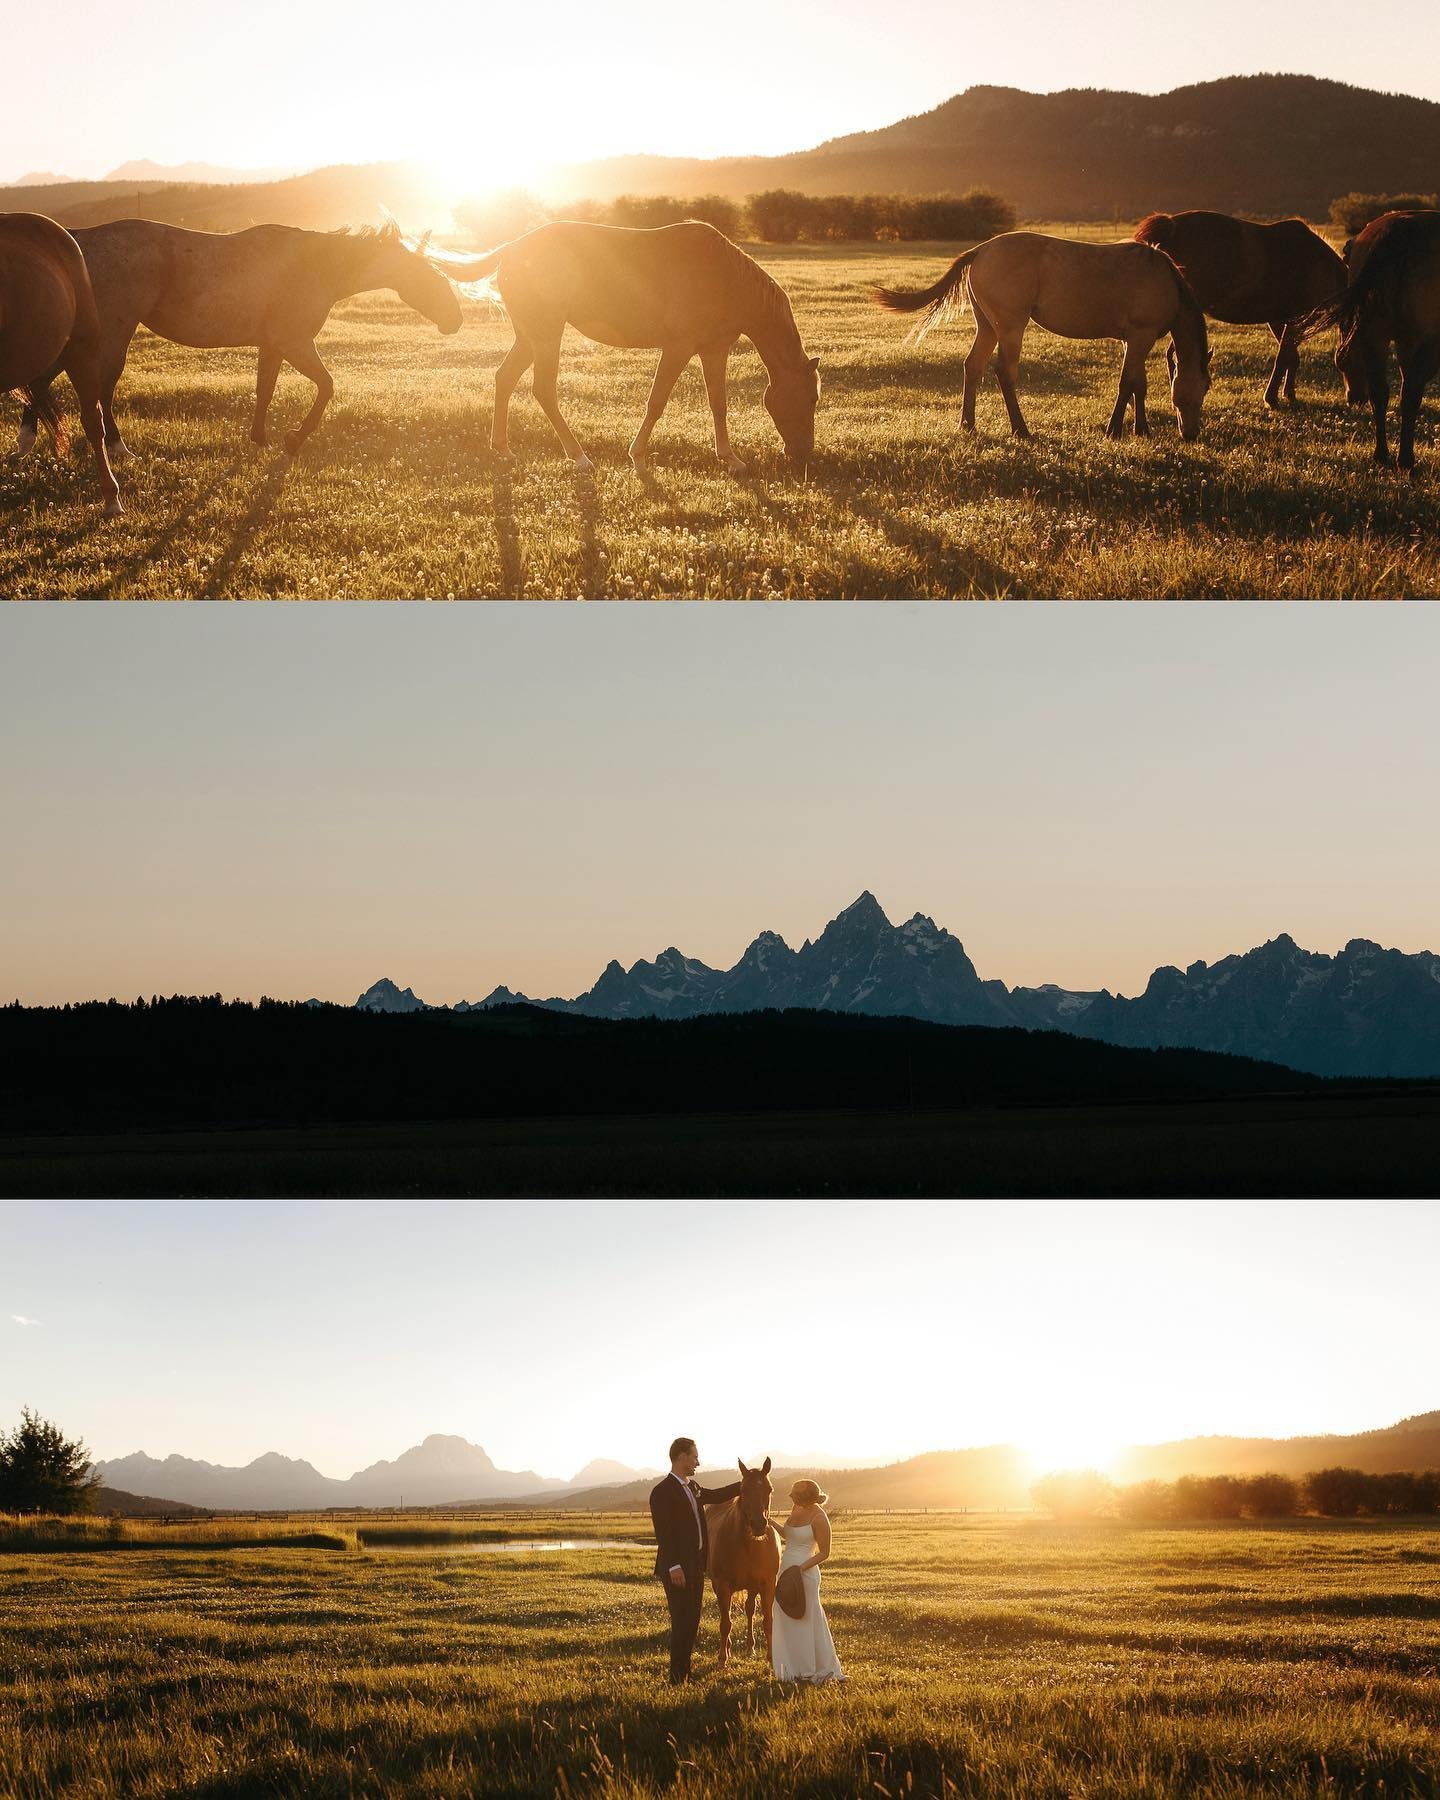 This wedding at @diamondcrossranch will always hold a special place in our hearts. The beauty of this land, the grazing horses, and Grand Tetons, made the perfect backdrop for Paige and Sam&rsquo;s wedding story. Heartfelt emotions, sincere love and 